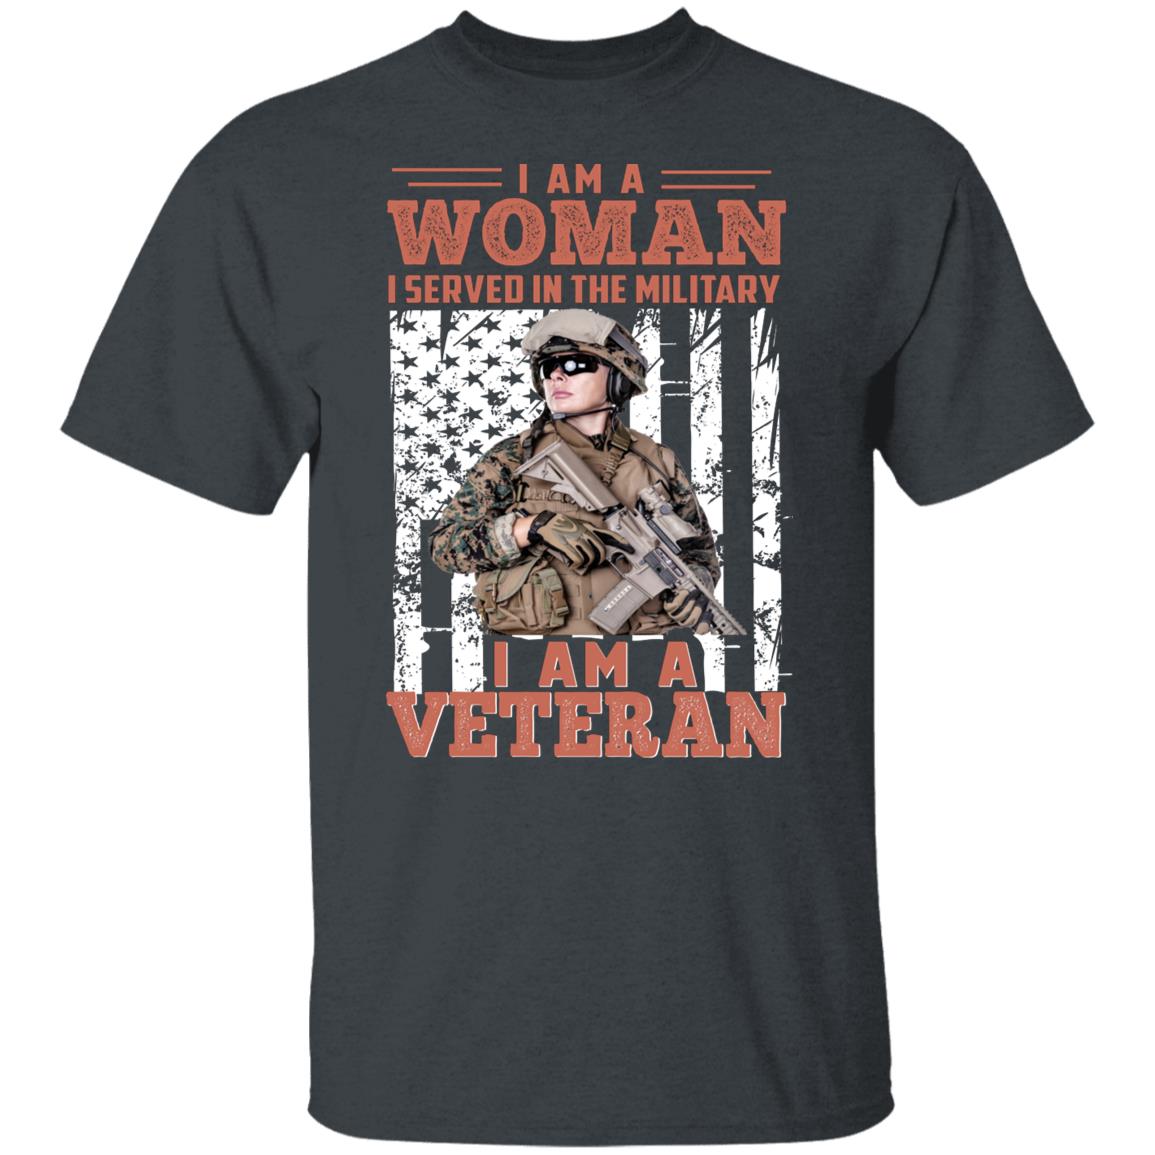 I am a woman I served in the military veteran gift T-shirt